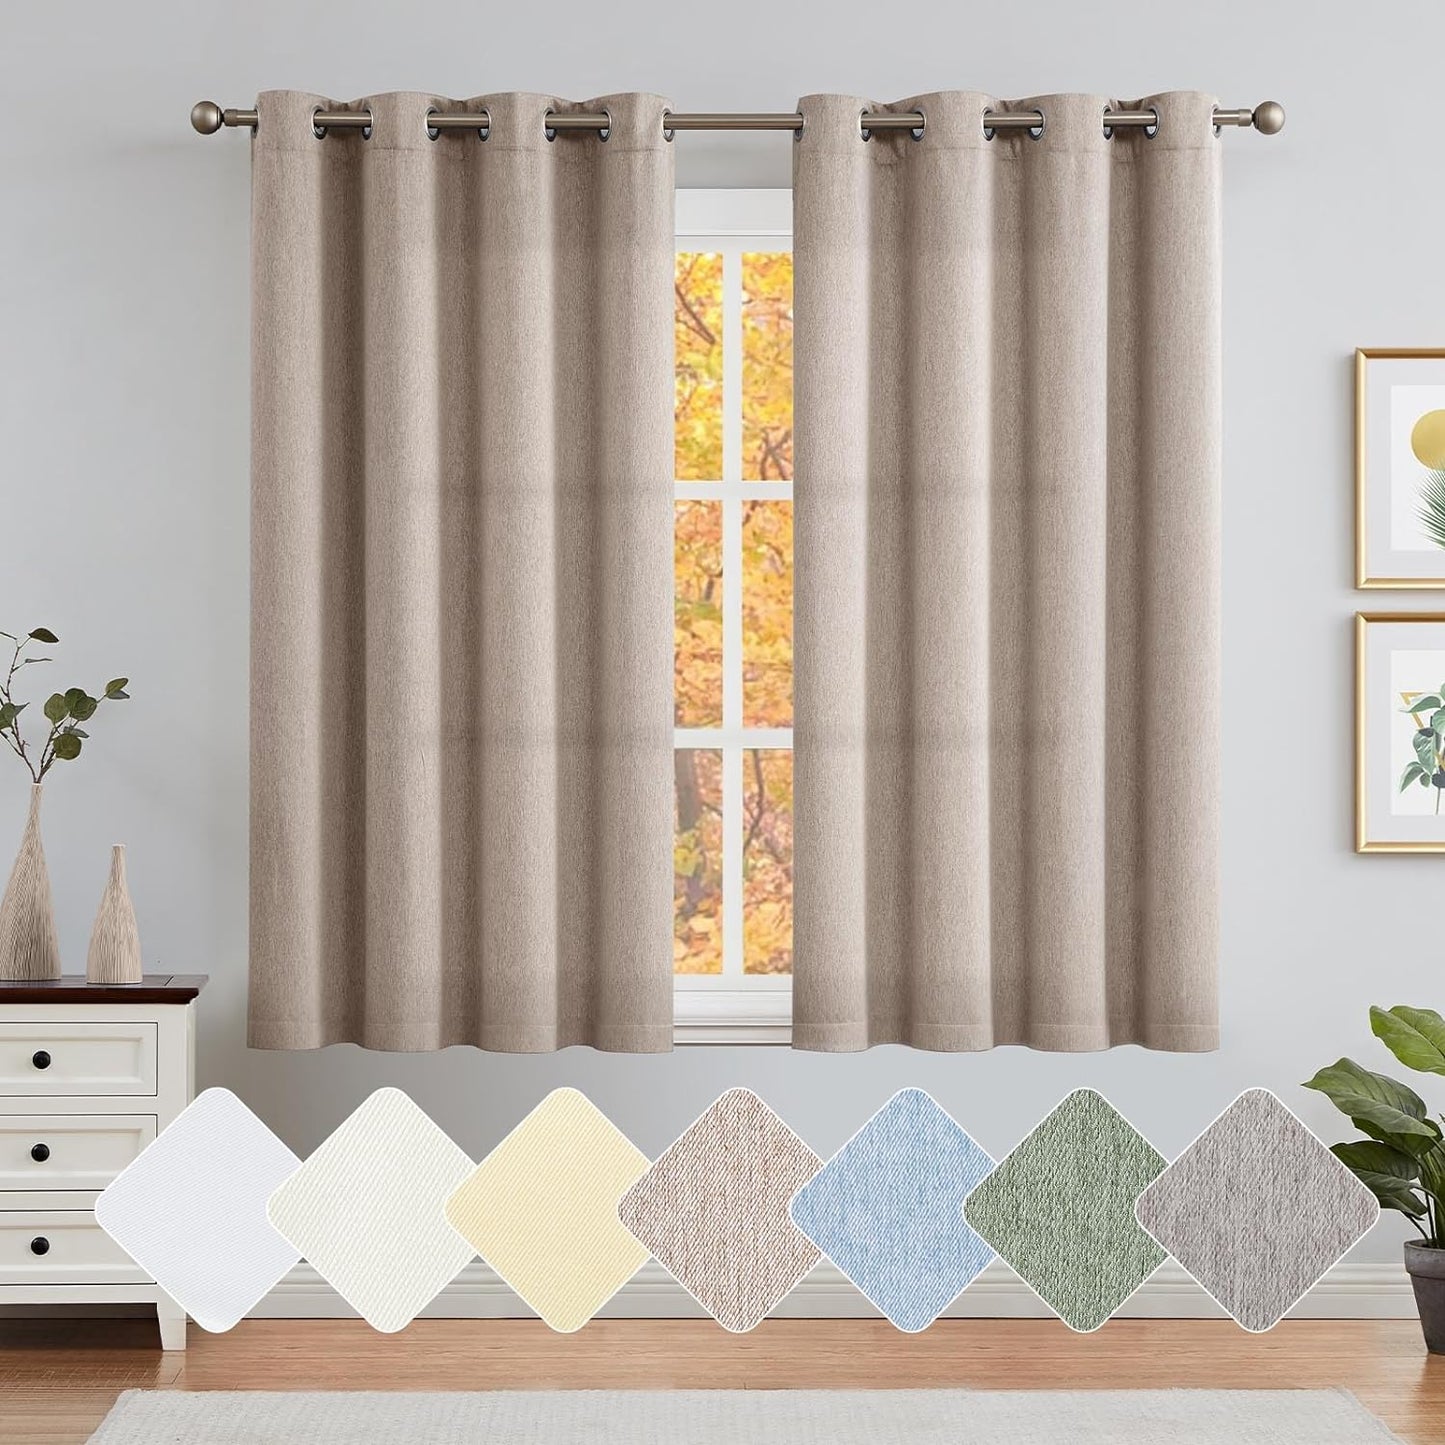 Jinchan Curtains for Bedroom Living Room 84 Inch Long Room Darkening Farmhouse Country Window Curtains Heathered Denim Blue Curtains Grommet Curtains Drapes 2 Panels  CKNY HOME FASHION *Taupe 50"W X 63"L 